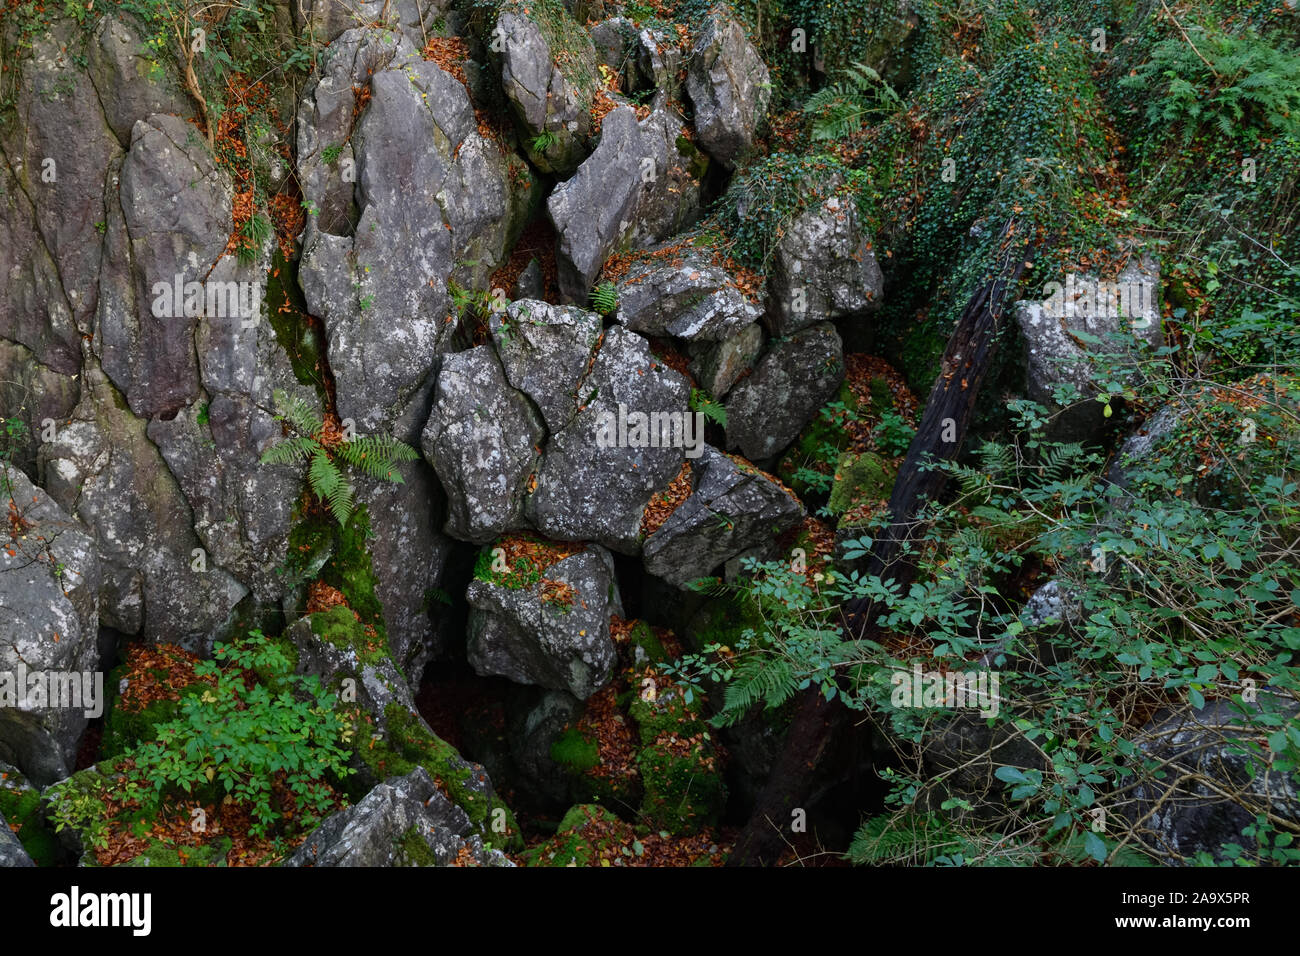 Felsenmeer, famous Nature Reserve, National Geotope, sea of rocks, rock chaos of Hemer, rock formation, in autumn, fall, Germany, Europe. Stock Photo